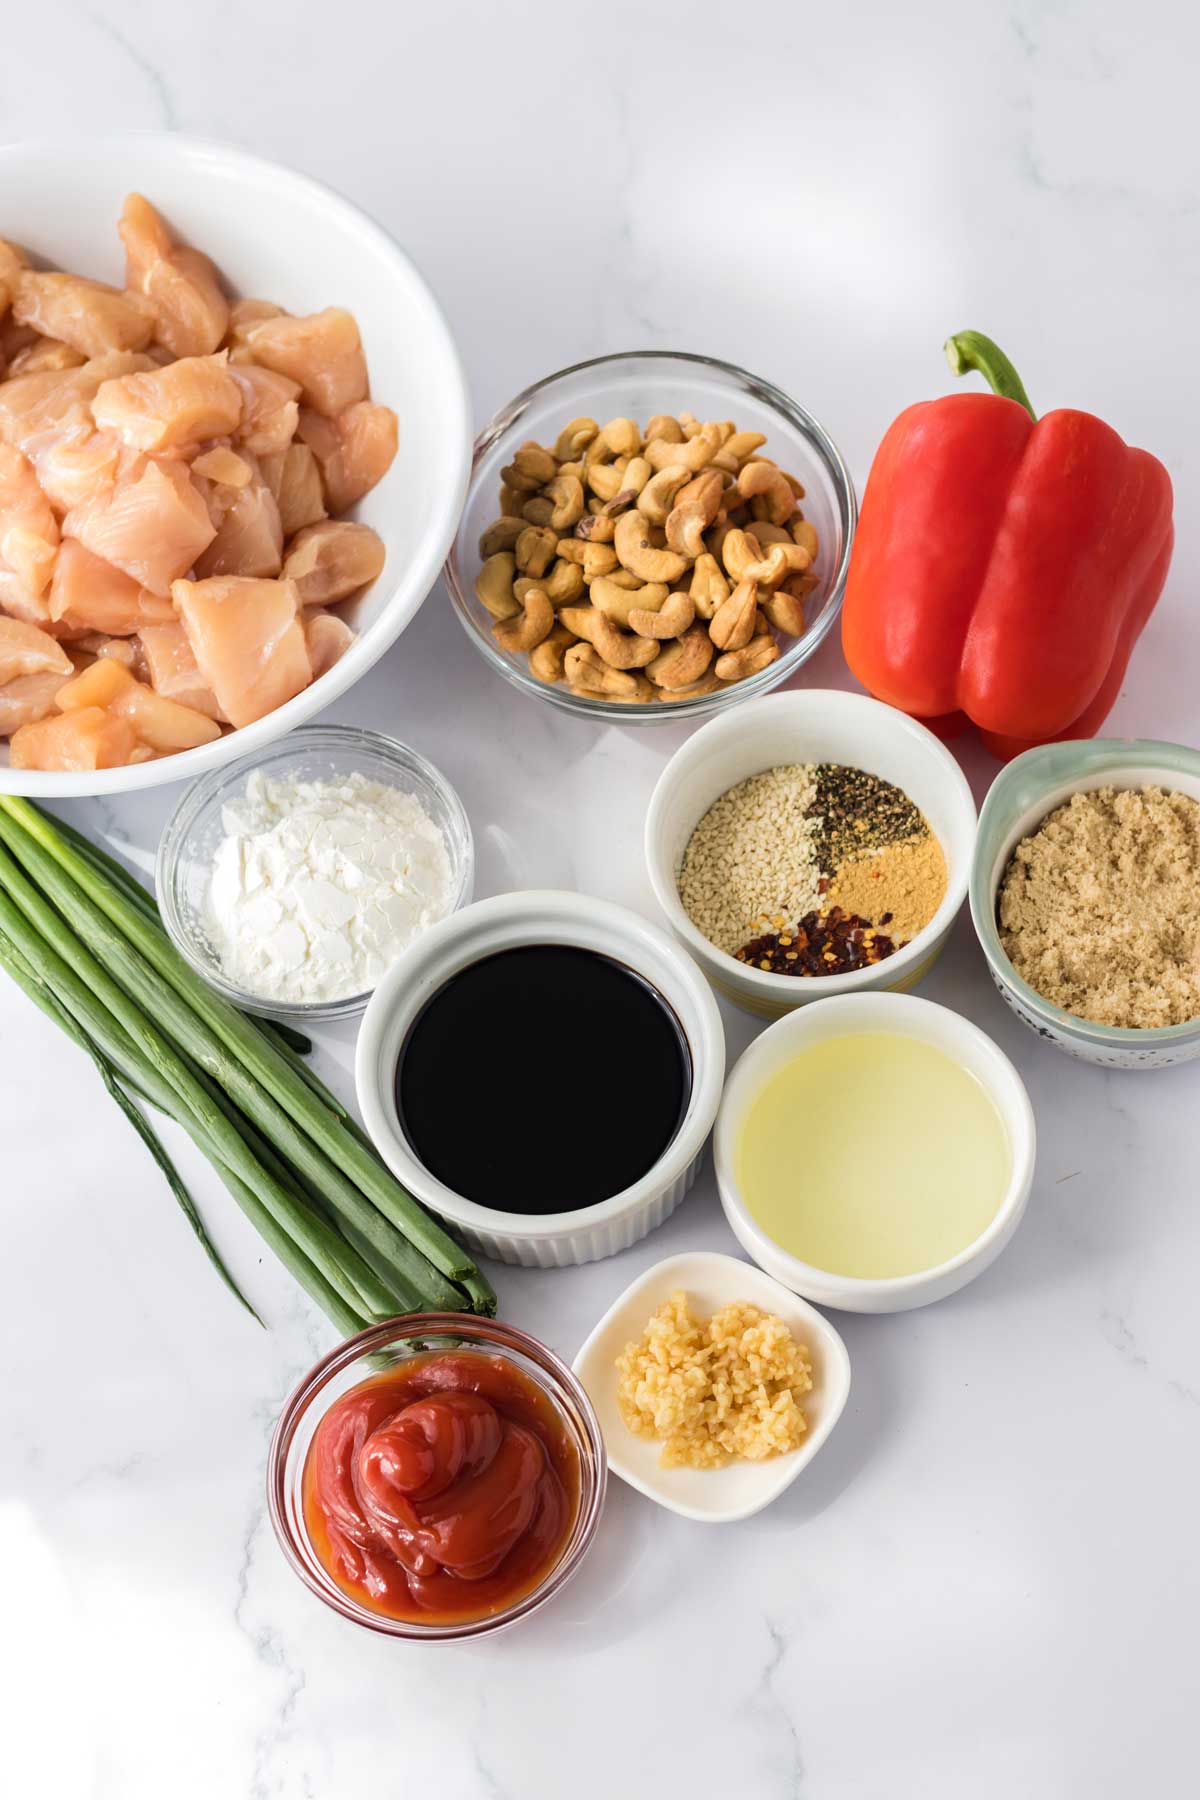 Ingredients for Crockpot Cashew Chicken include Chicken tenderloins, Cornstarch, Vegetable oil, Red bell pepper, Soy sauce (or coconut aminos), Ketchup, Brown sugar, Fresh garlic, Black pepper, Ground ginger, Red pepper flakes (optional), Sesame seeds, Cashews, Scallions (green onions)Chicken tenderloins, Cornstarch, Vegetable oil, Red bell pepper, Soy sauce (or coconut aminos), Ketchup, Brown sugar, Fresh garlic, Black pepper, Ground ginger, Red pepper flakes (optional), Sesame seeds, Cashews and Scallions (green onions)